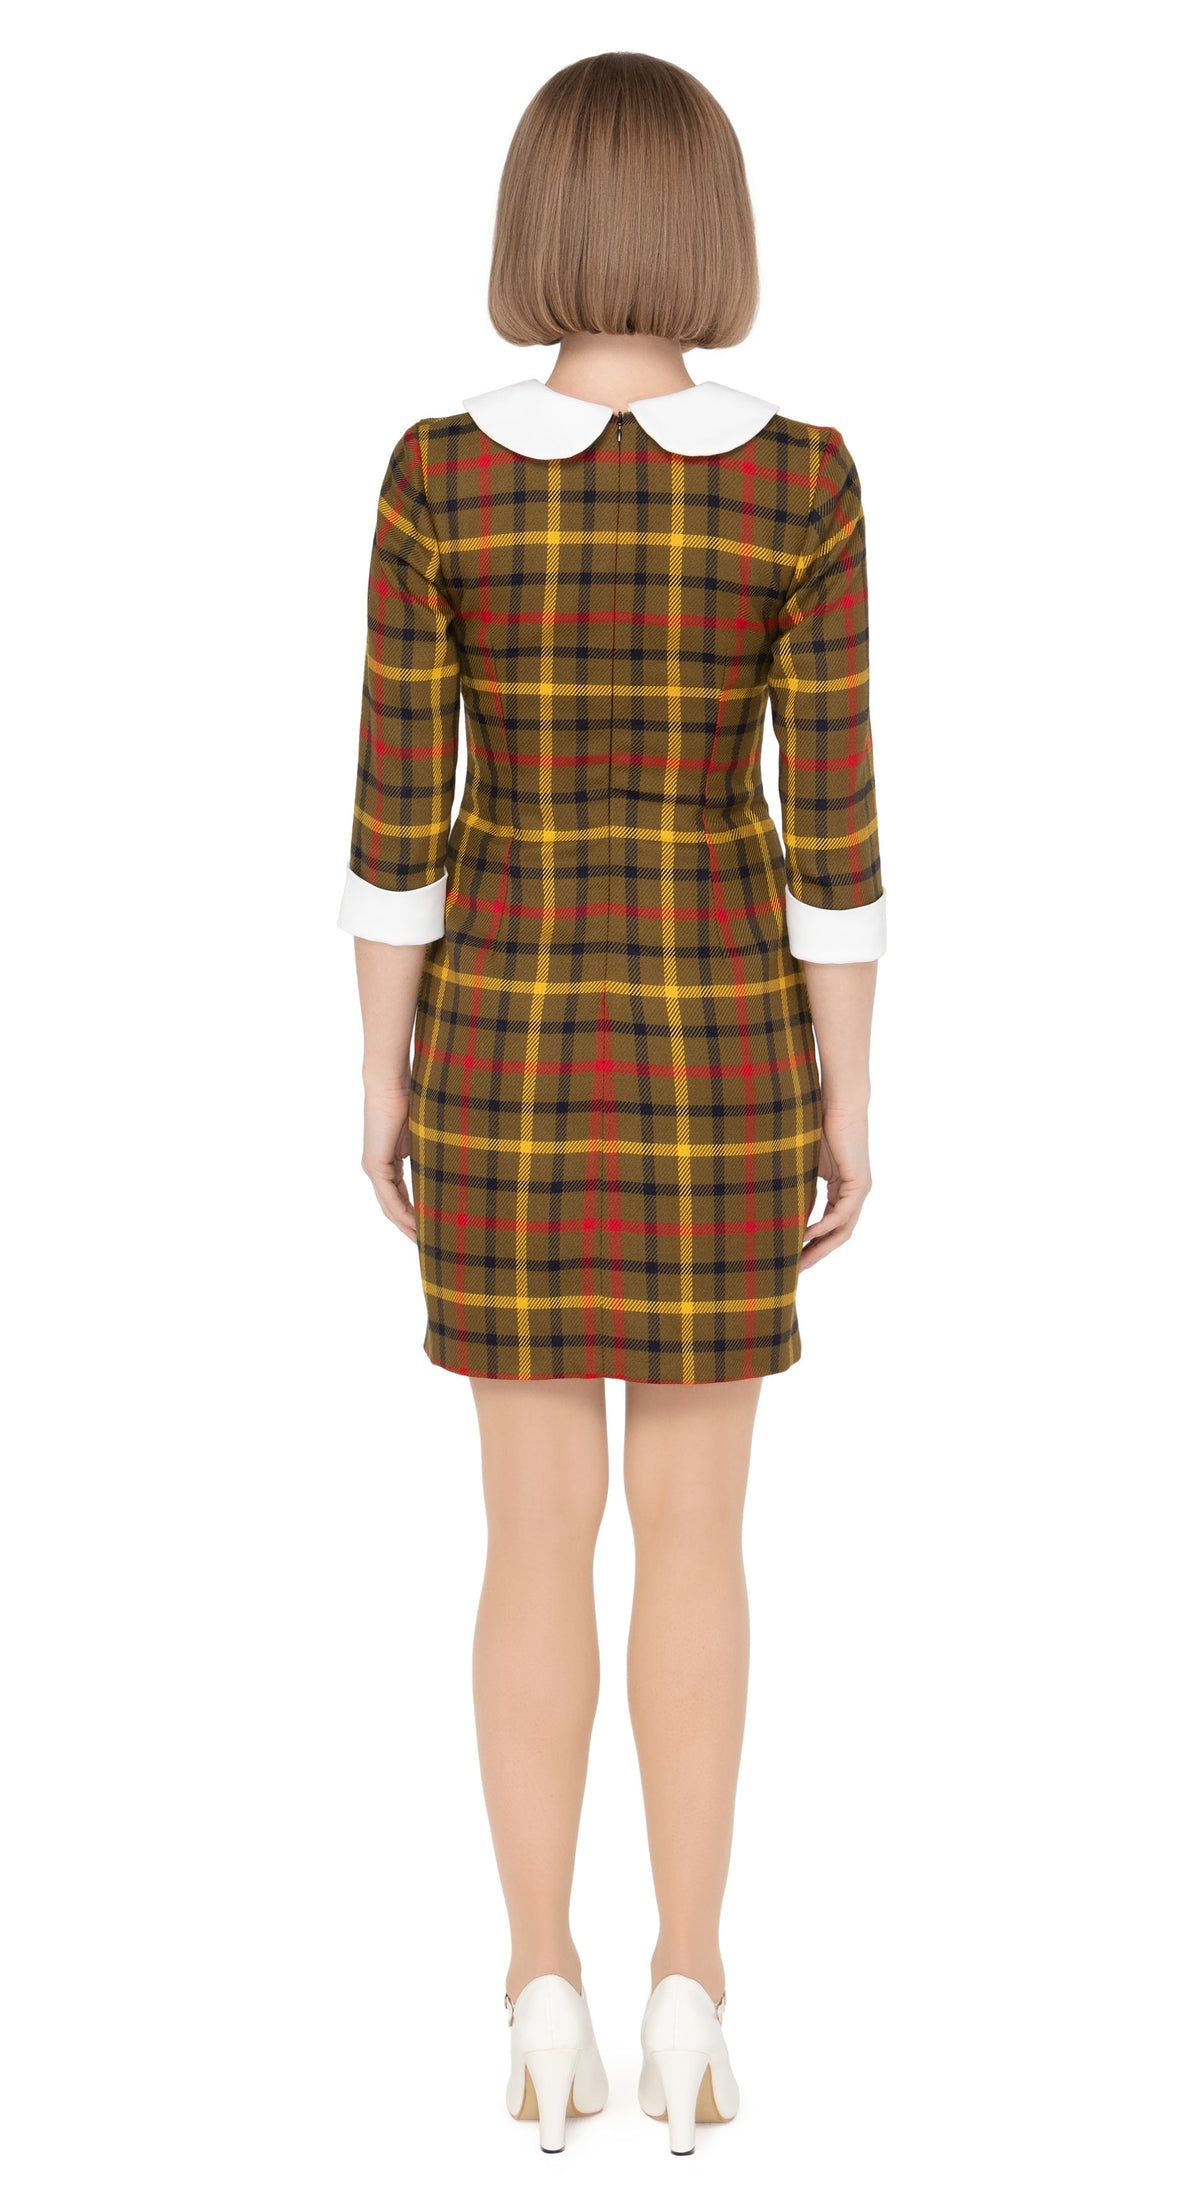 MARMALADE 1960S Style Plaid Dress with Peter Pan Collar